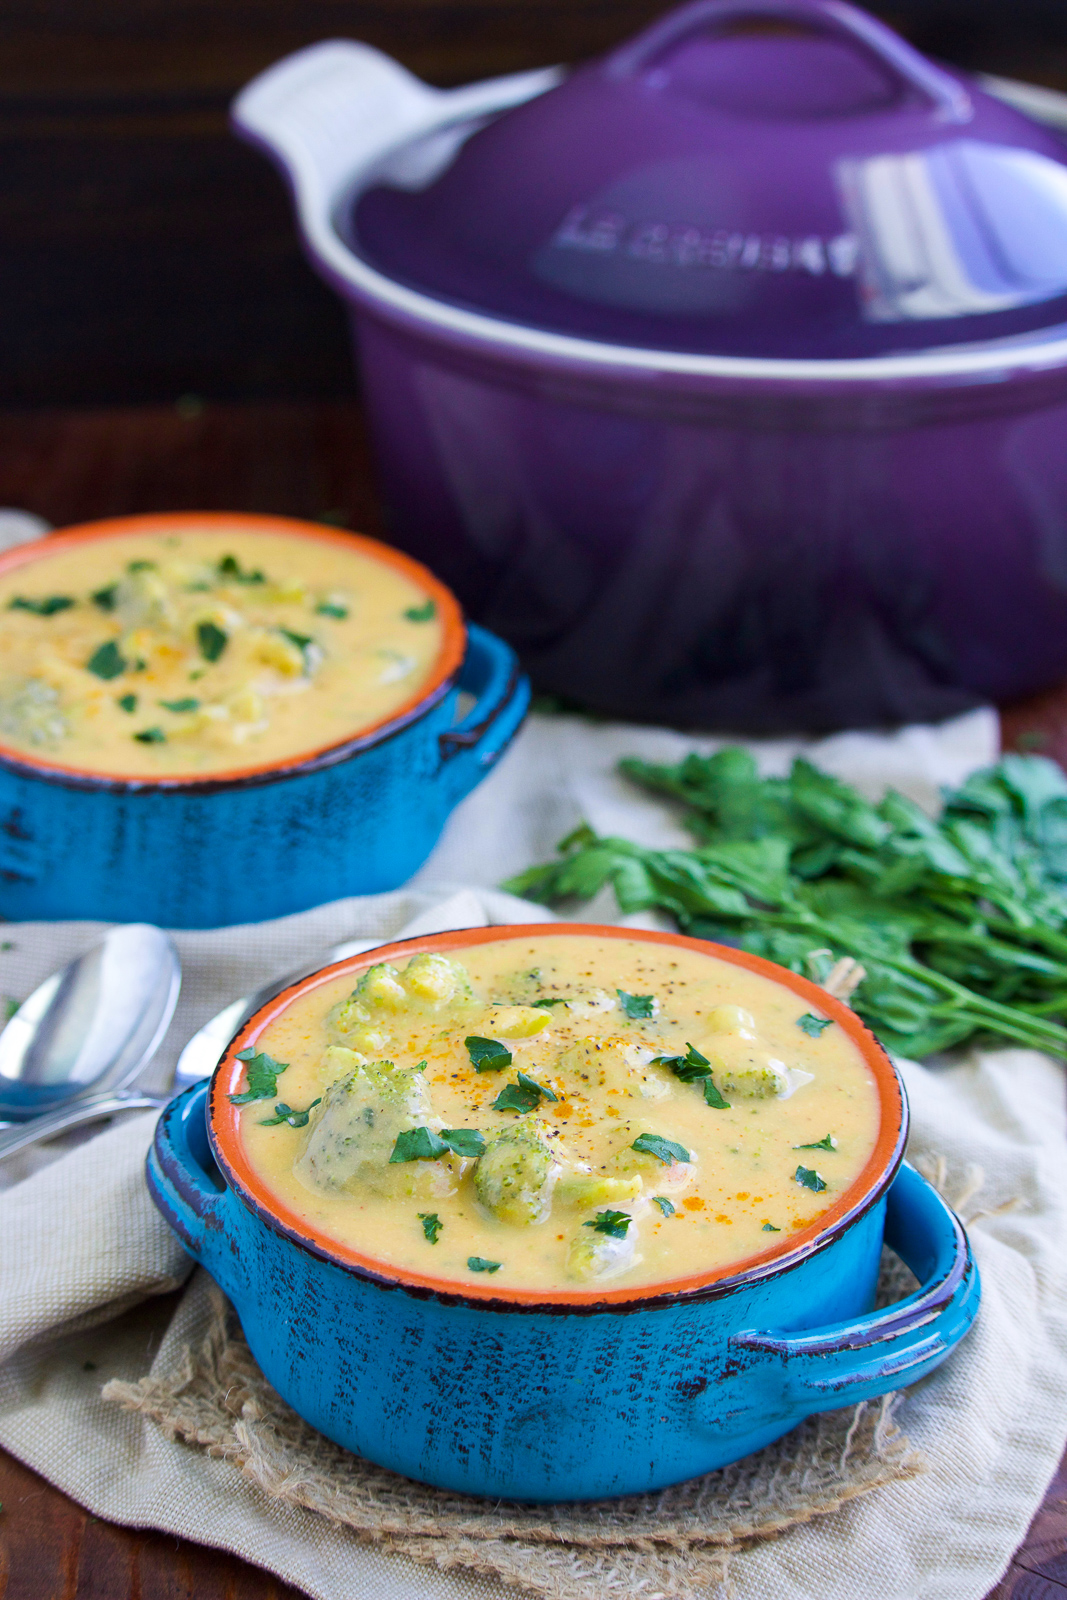 Two blue bowls filled with soup next to fresh parsley and a purple pot on a rustic background.